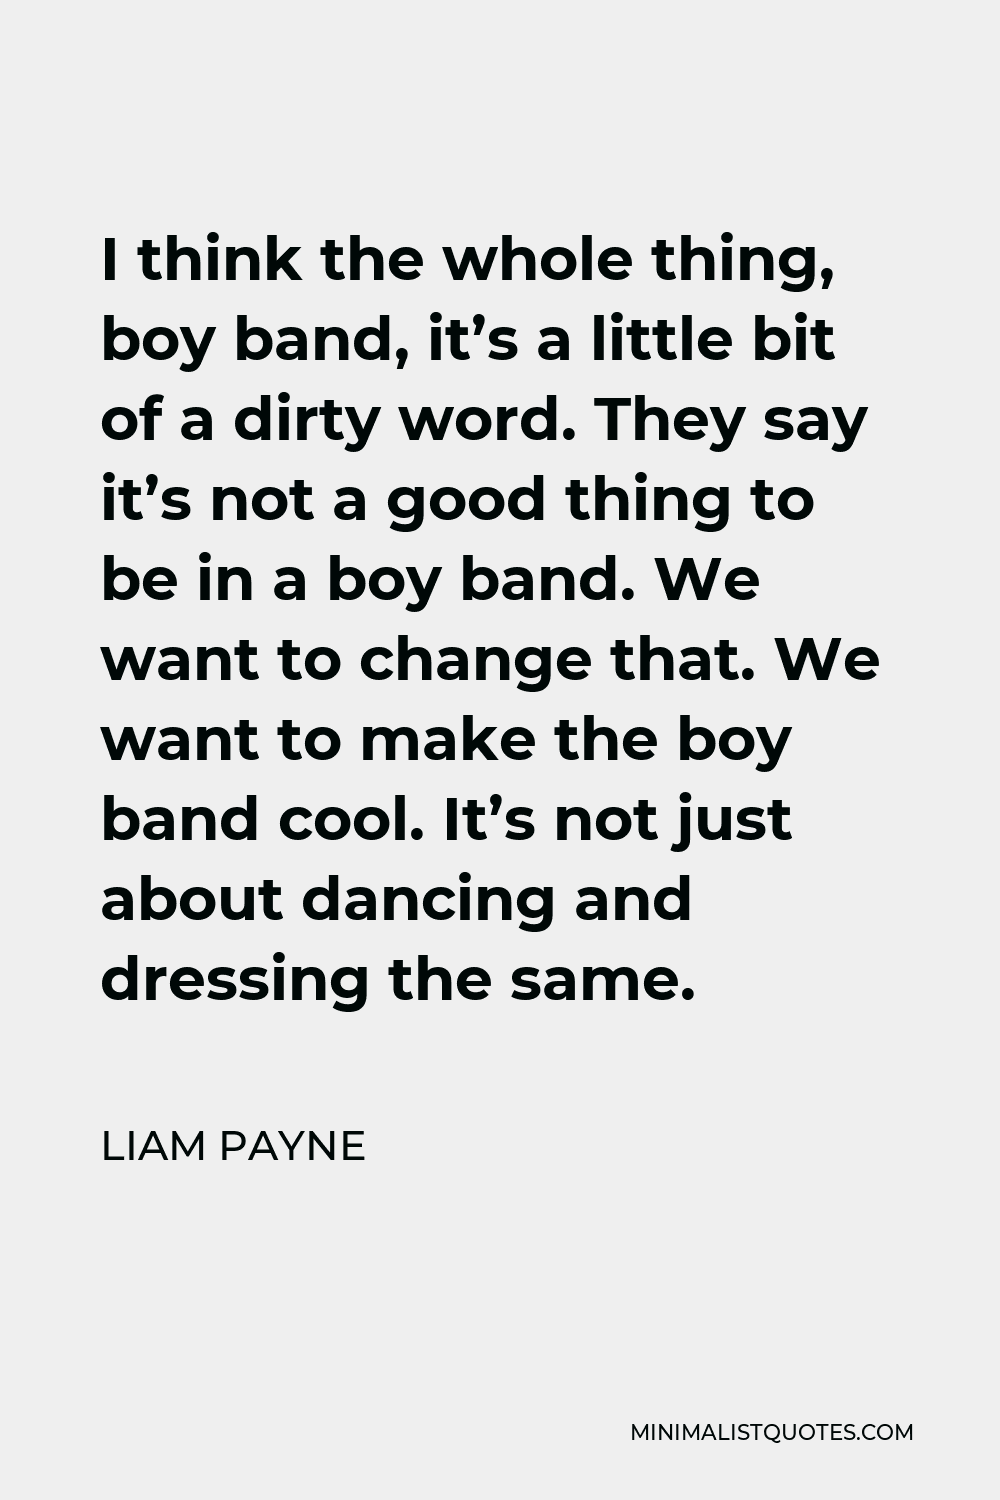 Liam Payne Quote - I think the whole thing, boy band, it’s a little bit of a dirty word. They say it’s not a good thing to be in a boy band. We want to change that. We want to make the boy band cool. It’s not just about dancing and dressing the same.